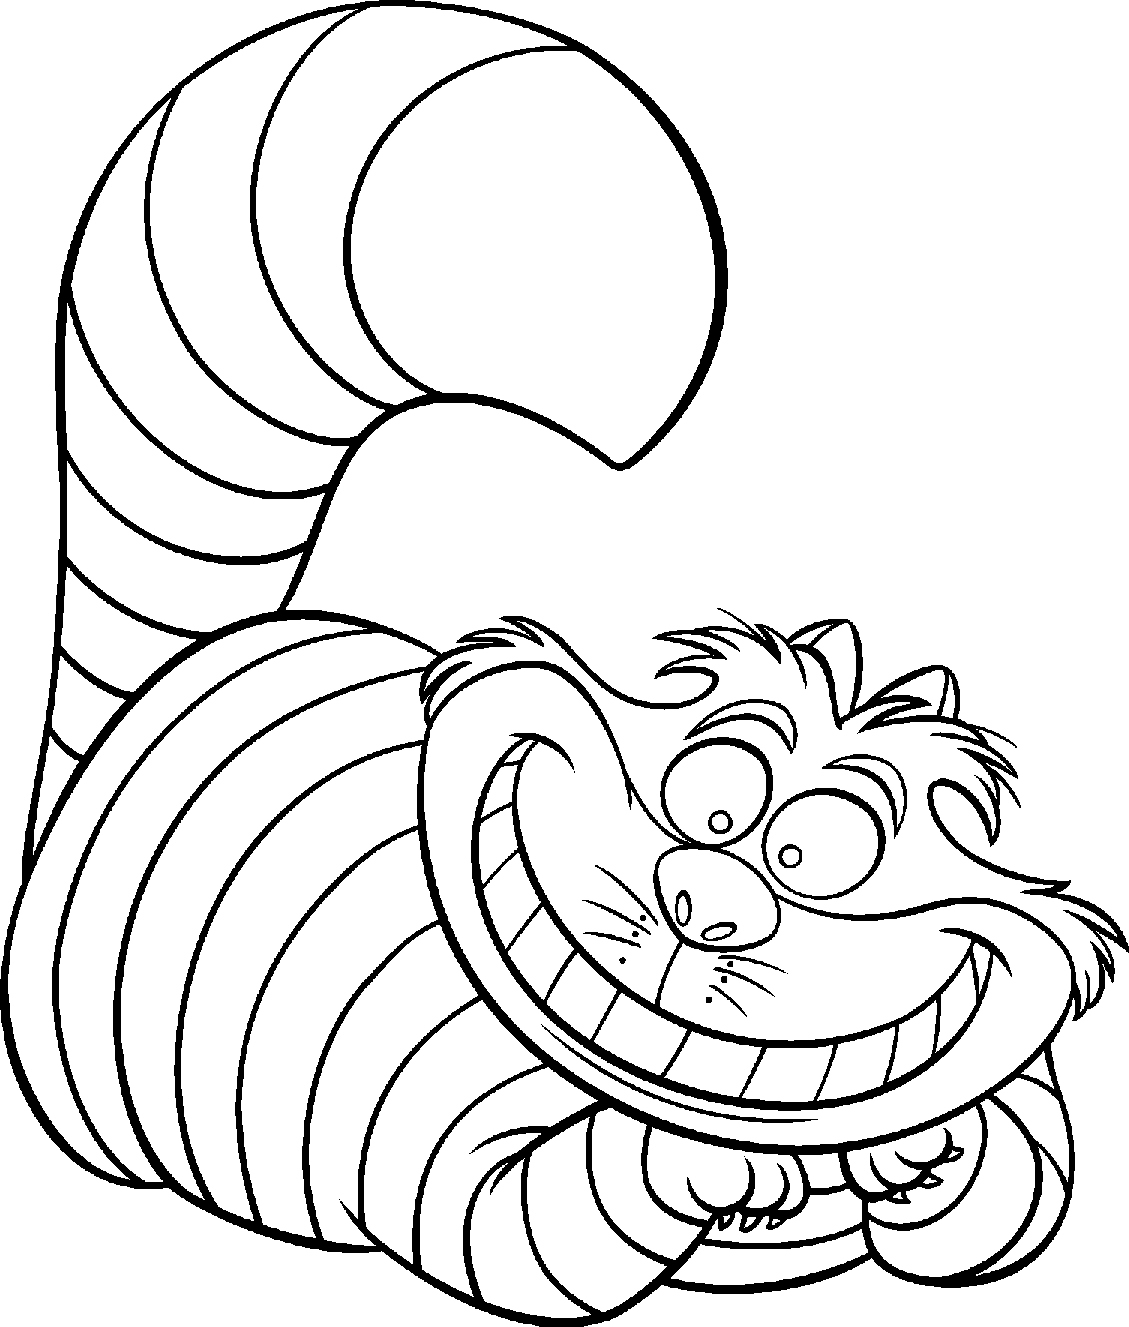 Cartoon Coloring Pages 20 Of 203   ClipArt Best   ClipArt Best